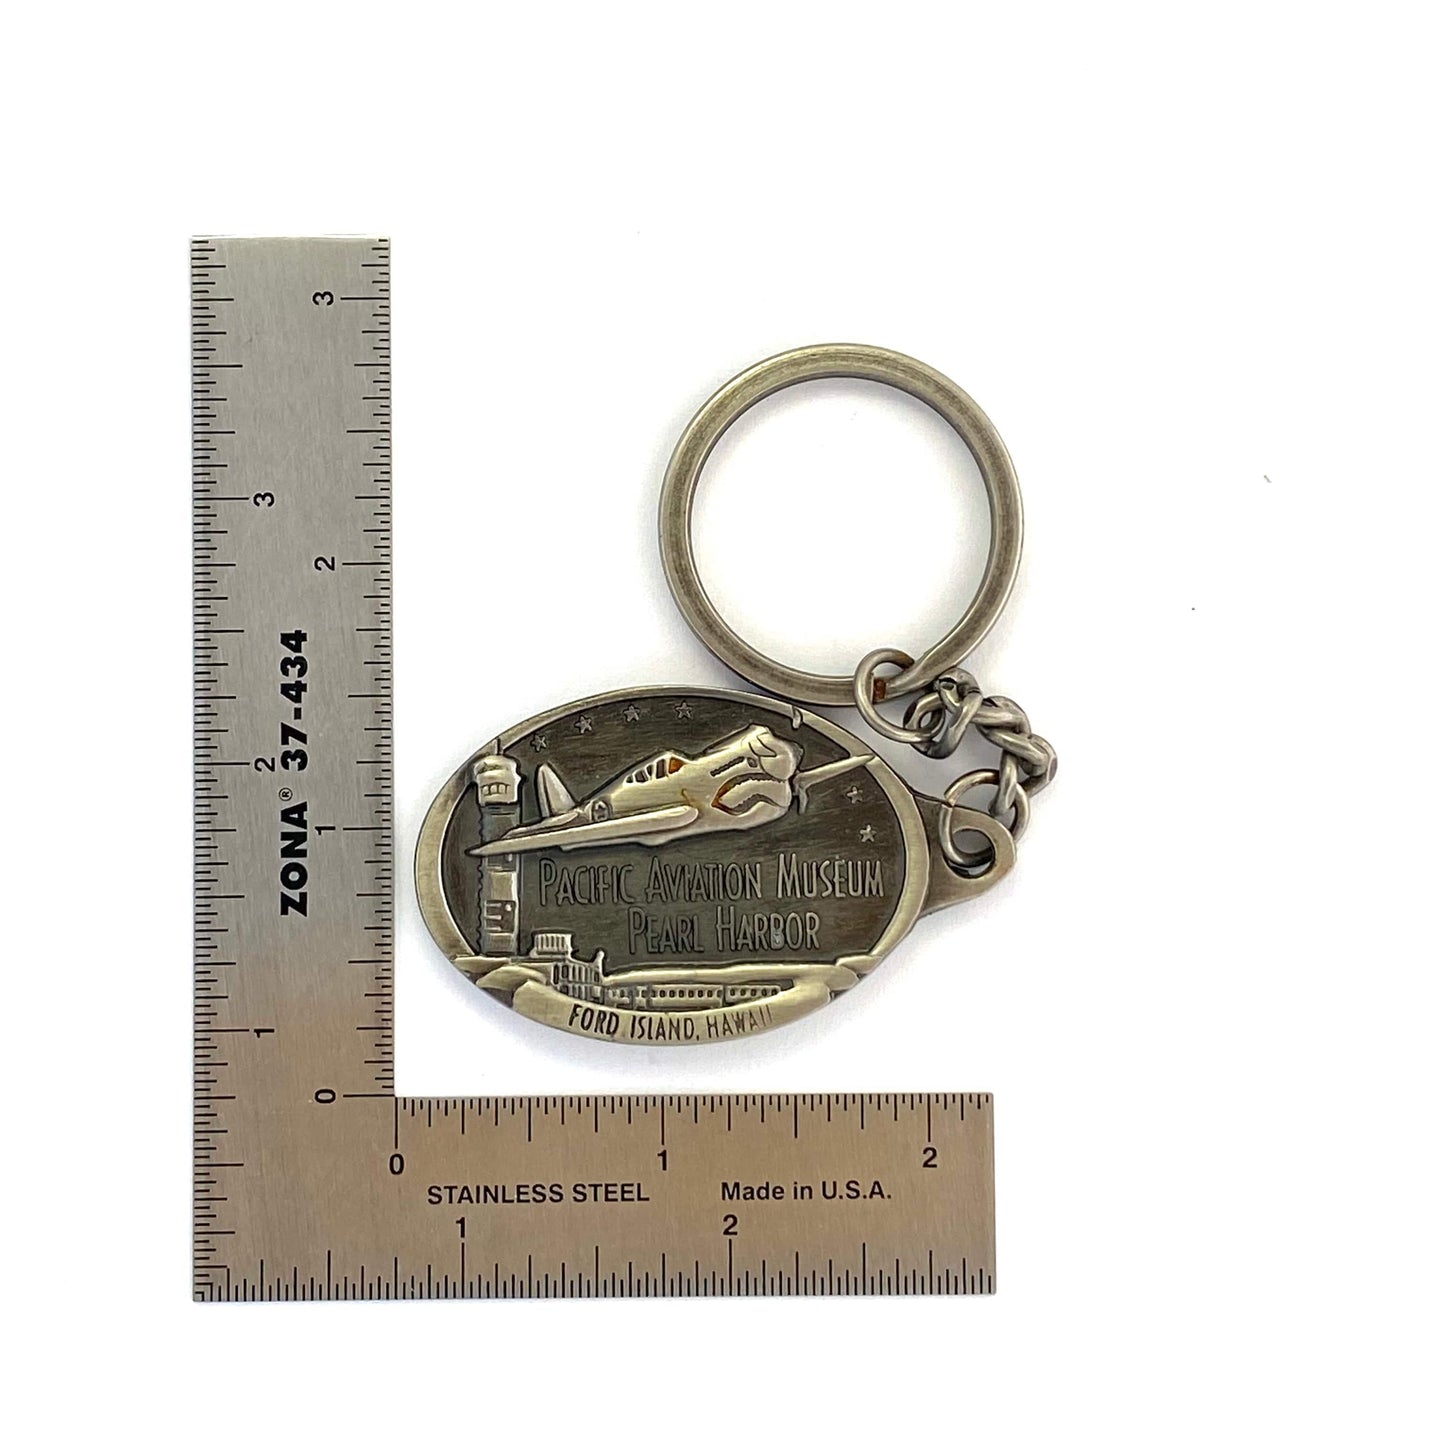 Pacific Aviation Museum Pearl Harbor Pewter Keychain Key Ring Souvenir